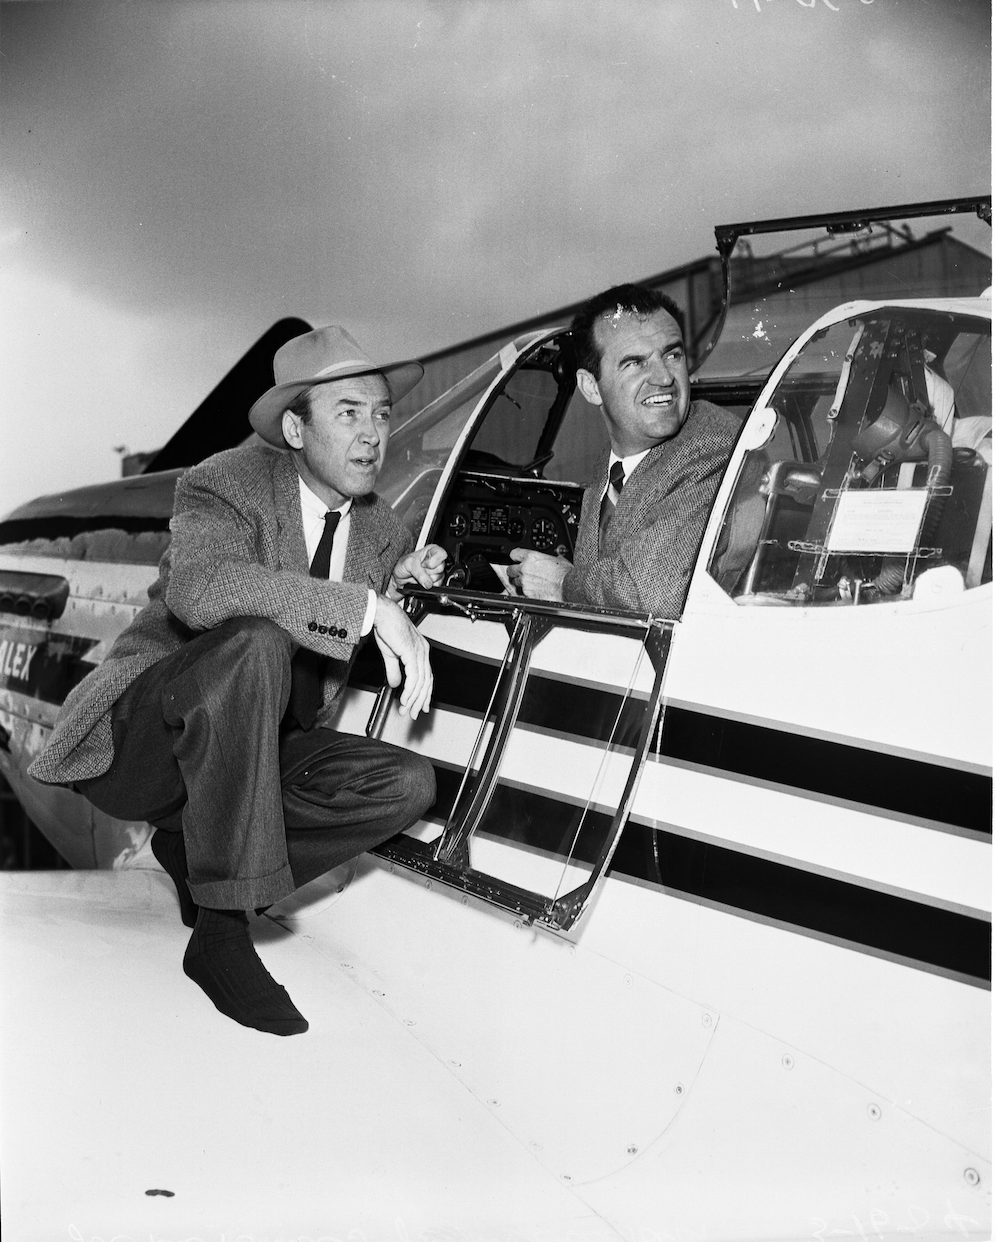 Jimmy Stewart crouches on Mr. Alex' wing, while Joe De Bona occupies the cockpit. (Unattributed)